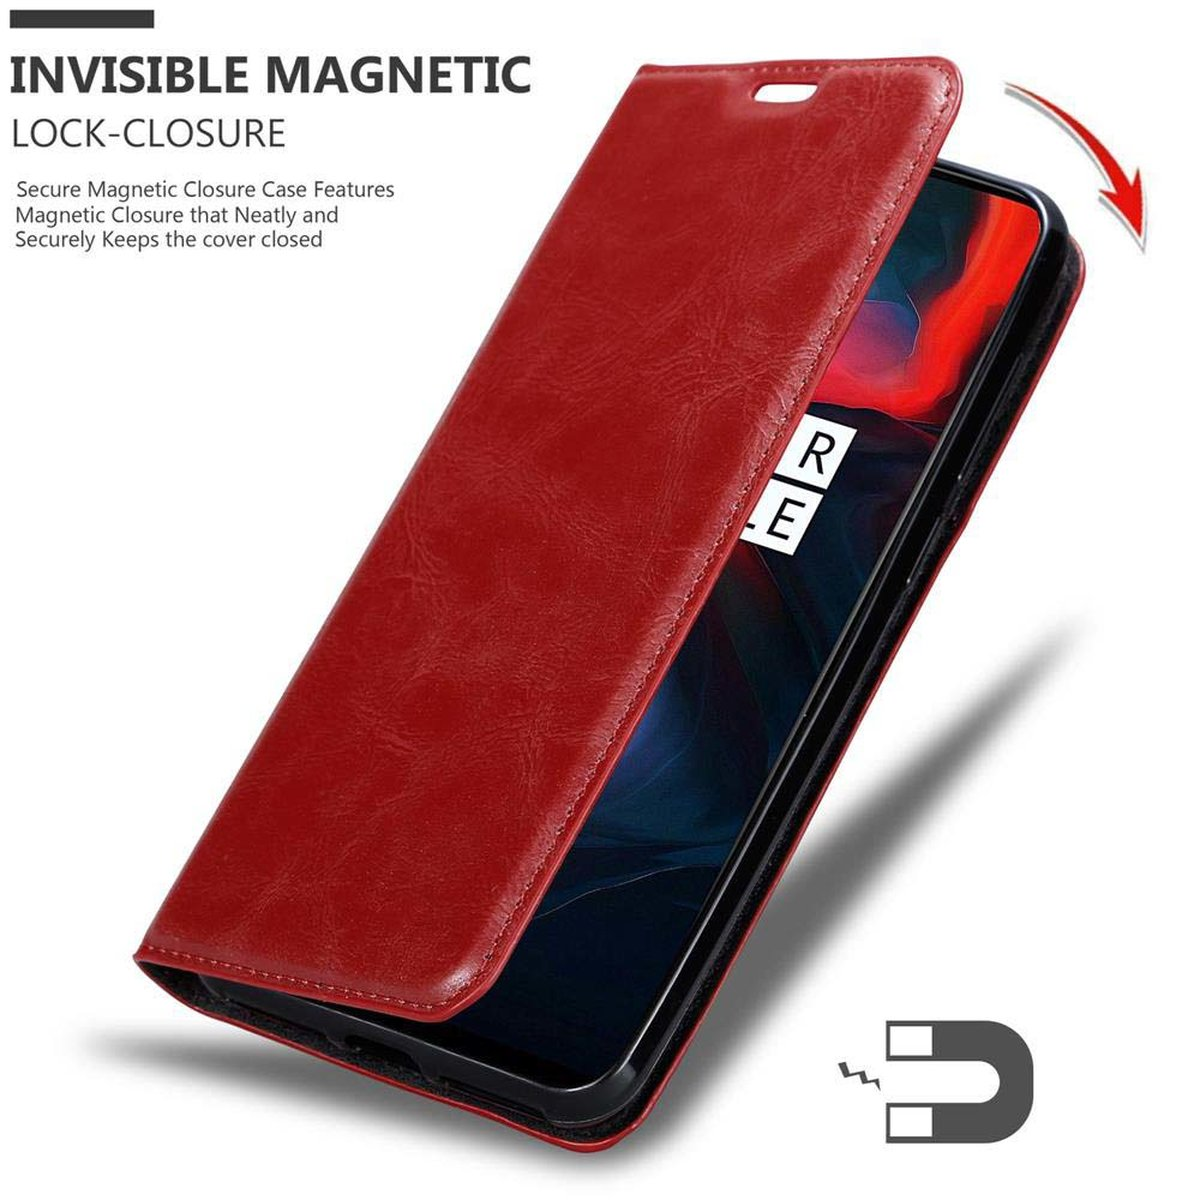 Bookcover, ROT Hülle APFEL 6, OnePlus, Invisible Magnet, CADORABO Book